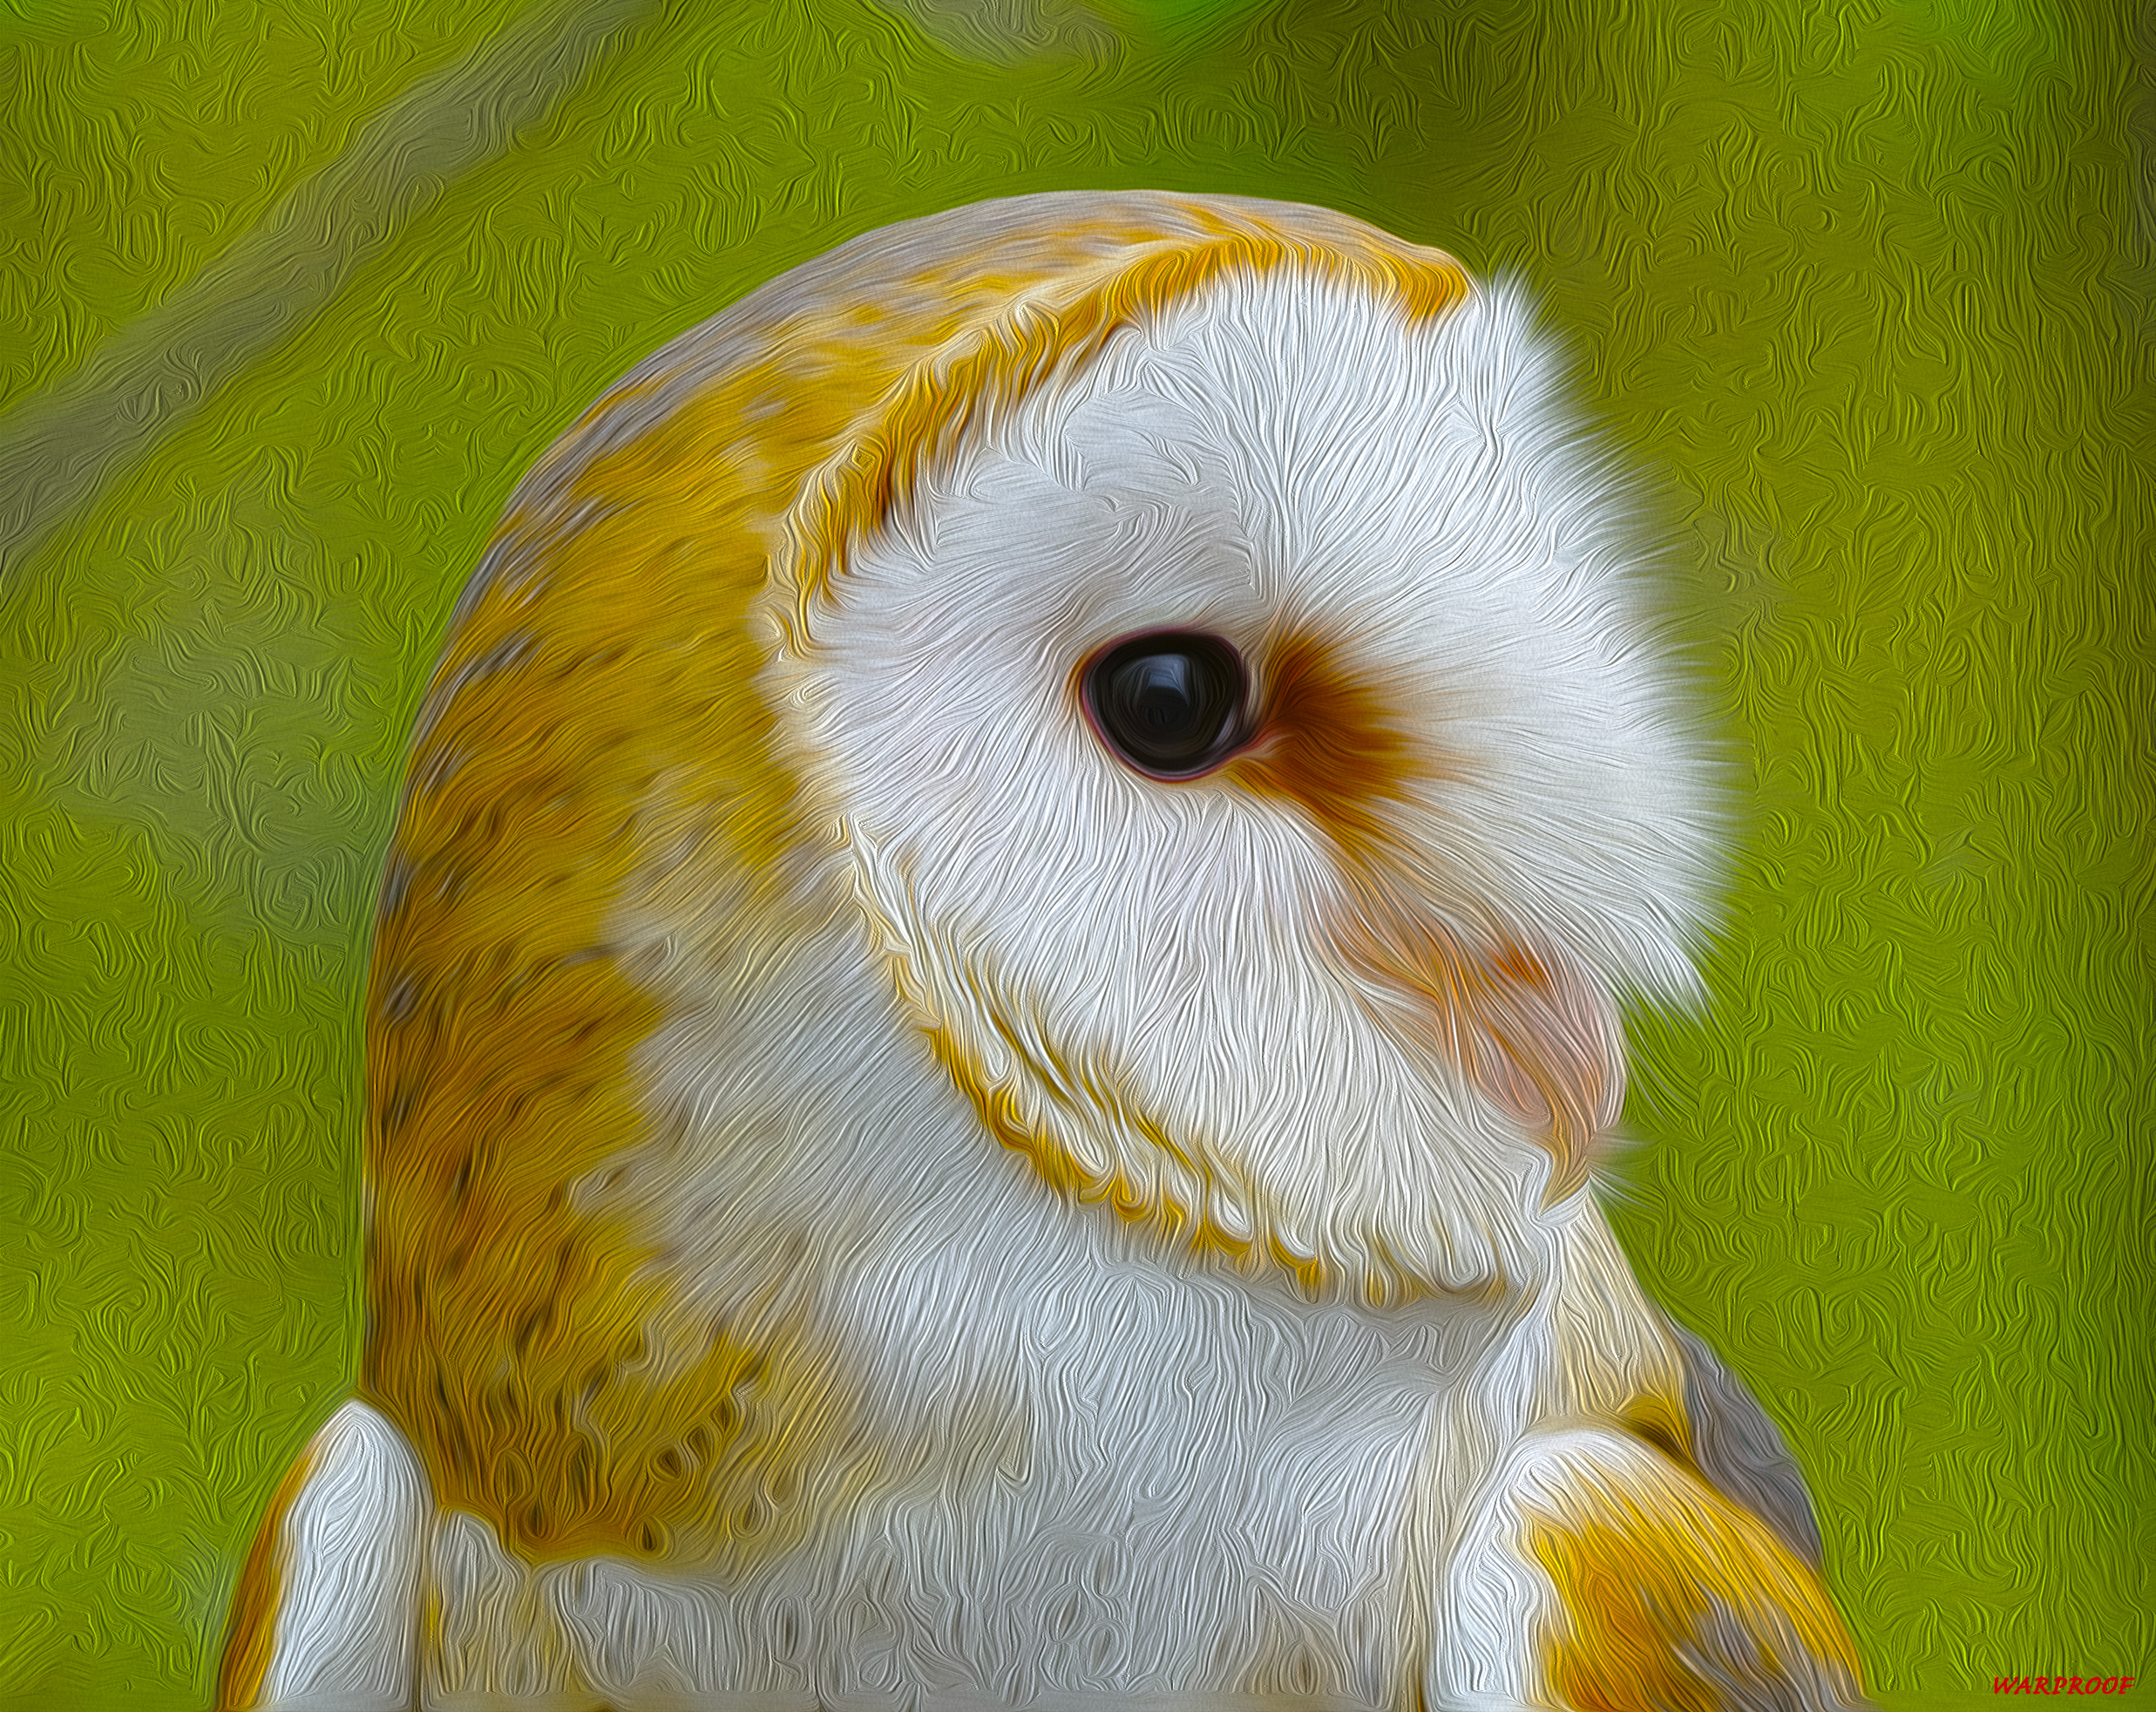 Hd 3d Wallpapers For Pc Dwownload 1080p 1920x1080 Free - Owl , HD Wallpaper & Backgrounds